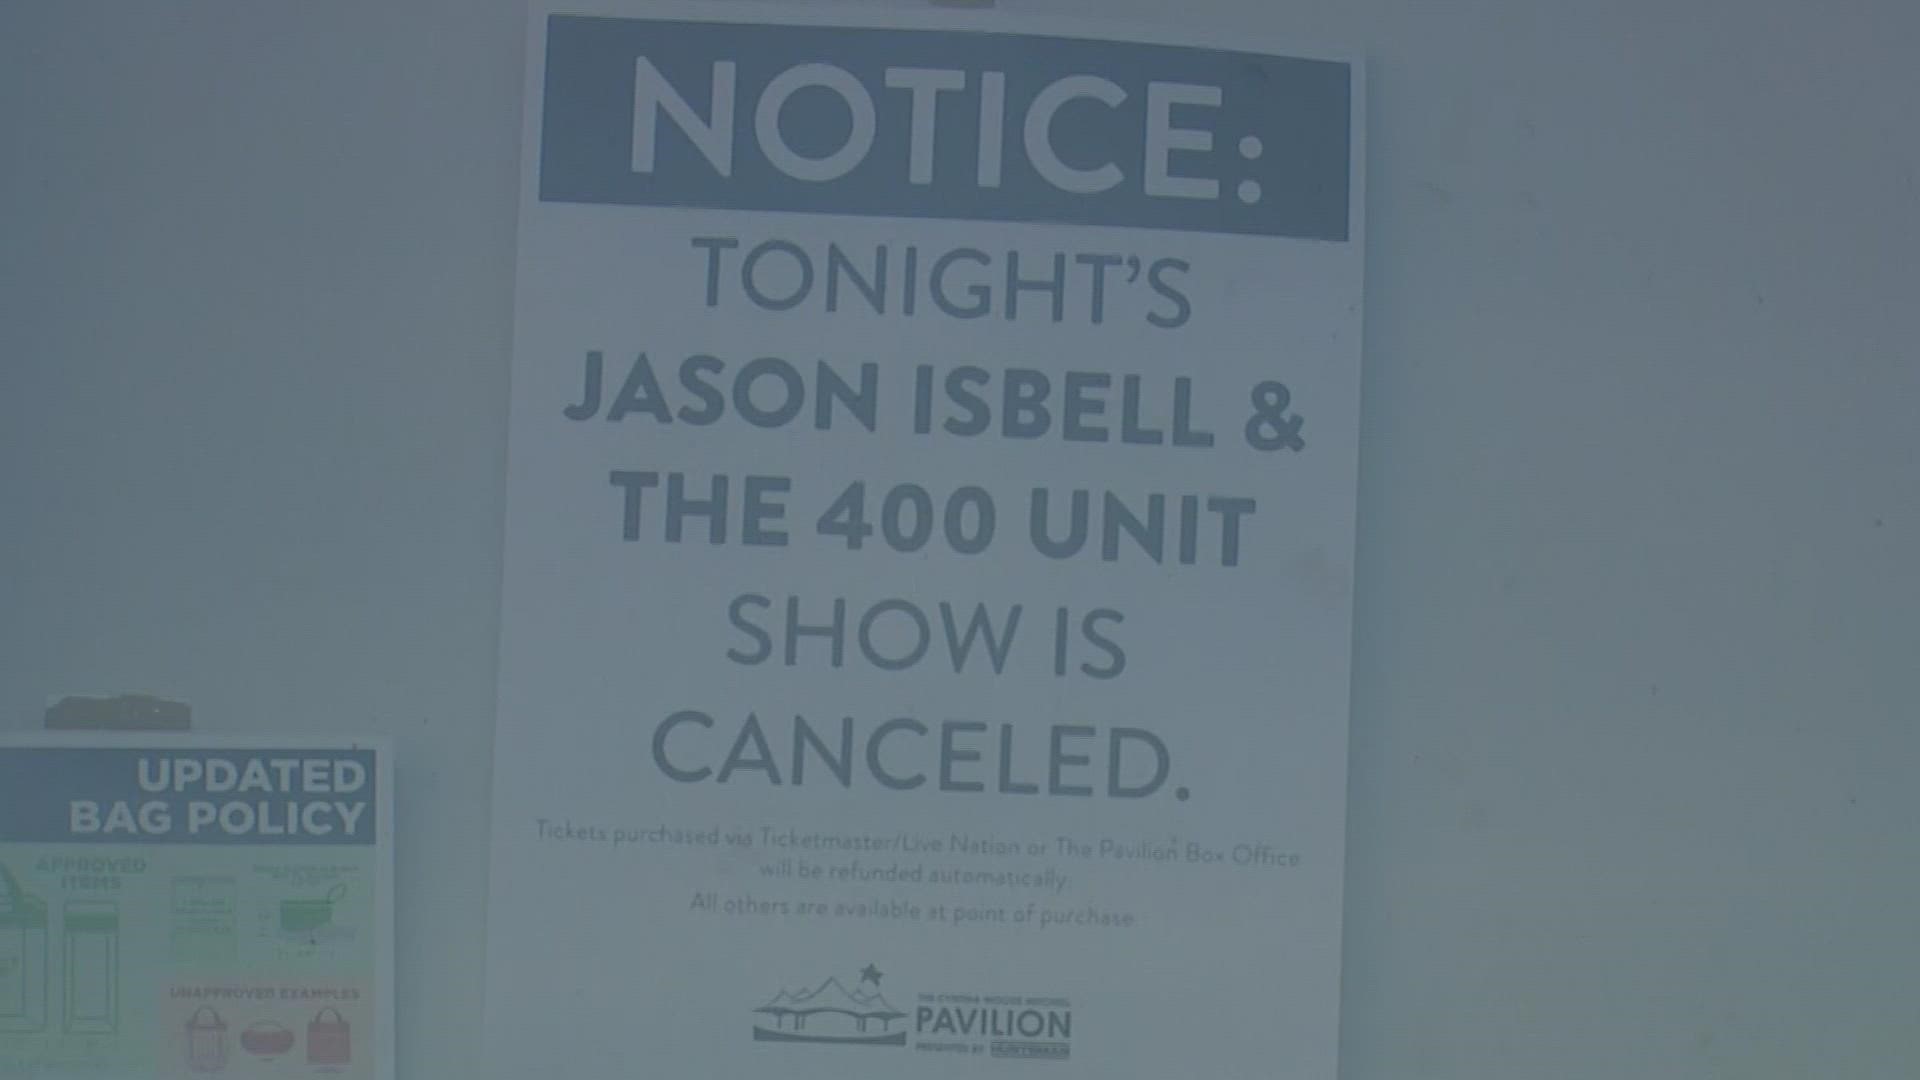 Jason Isbell has upped his requirements to get into his show: present proof of a COVID vaccine or a negative PCR test.